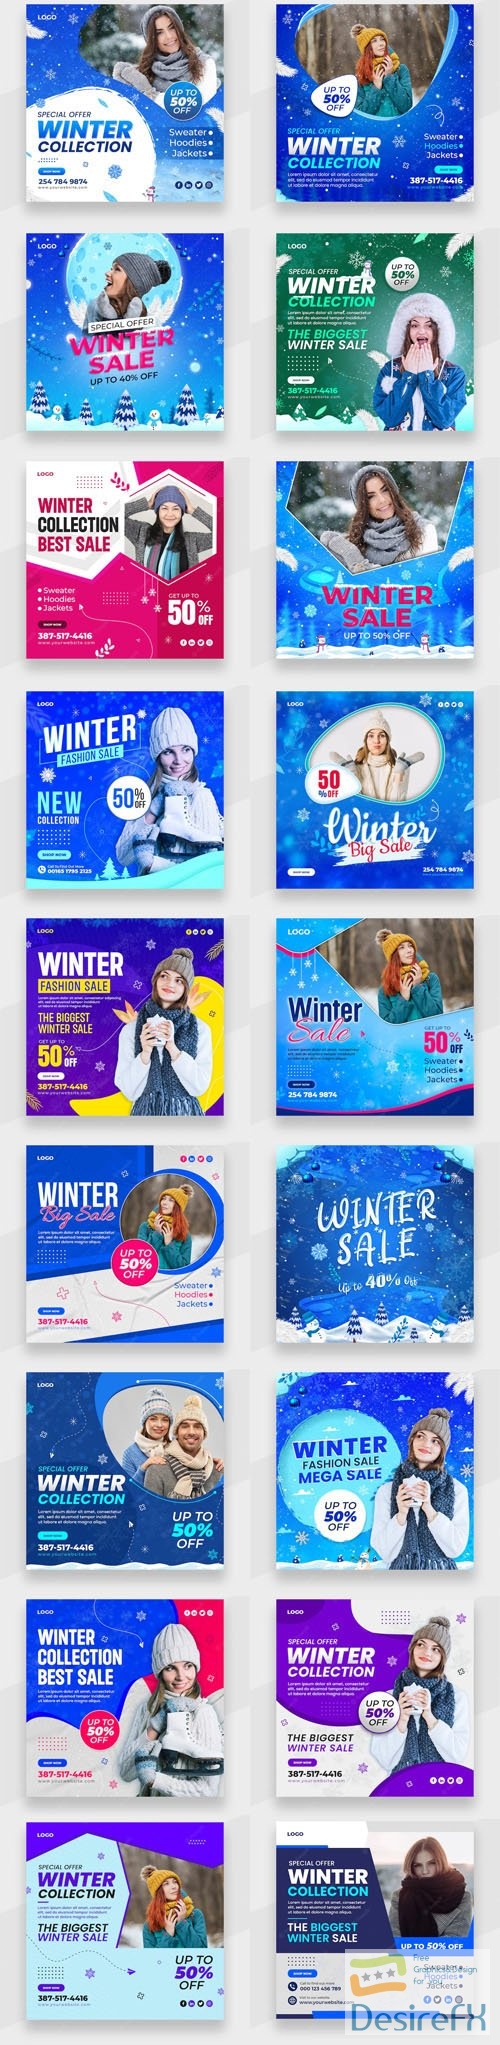 30+ Winter Sales Banners PSD Templates